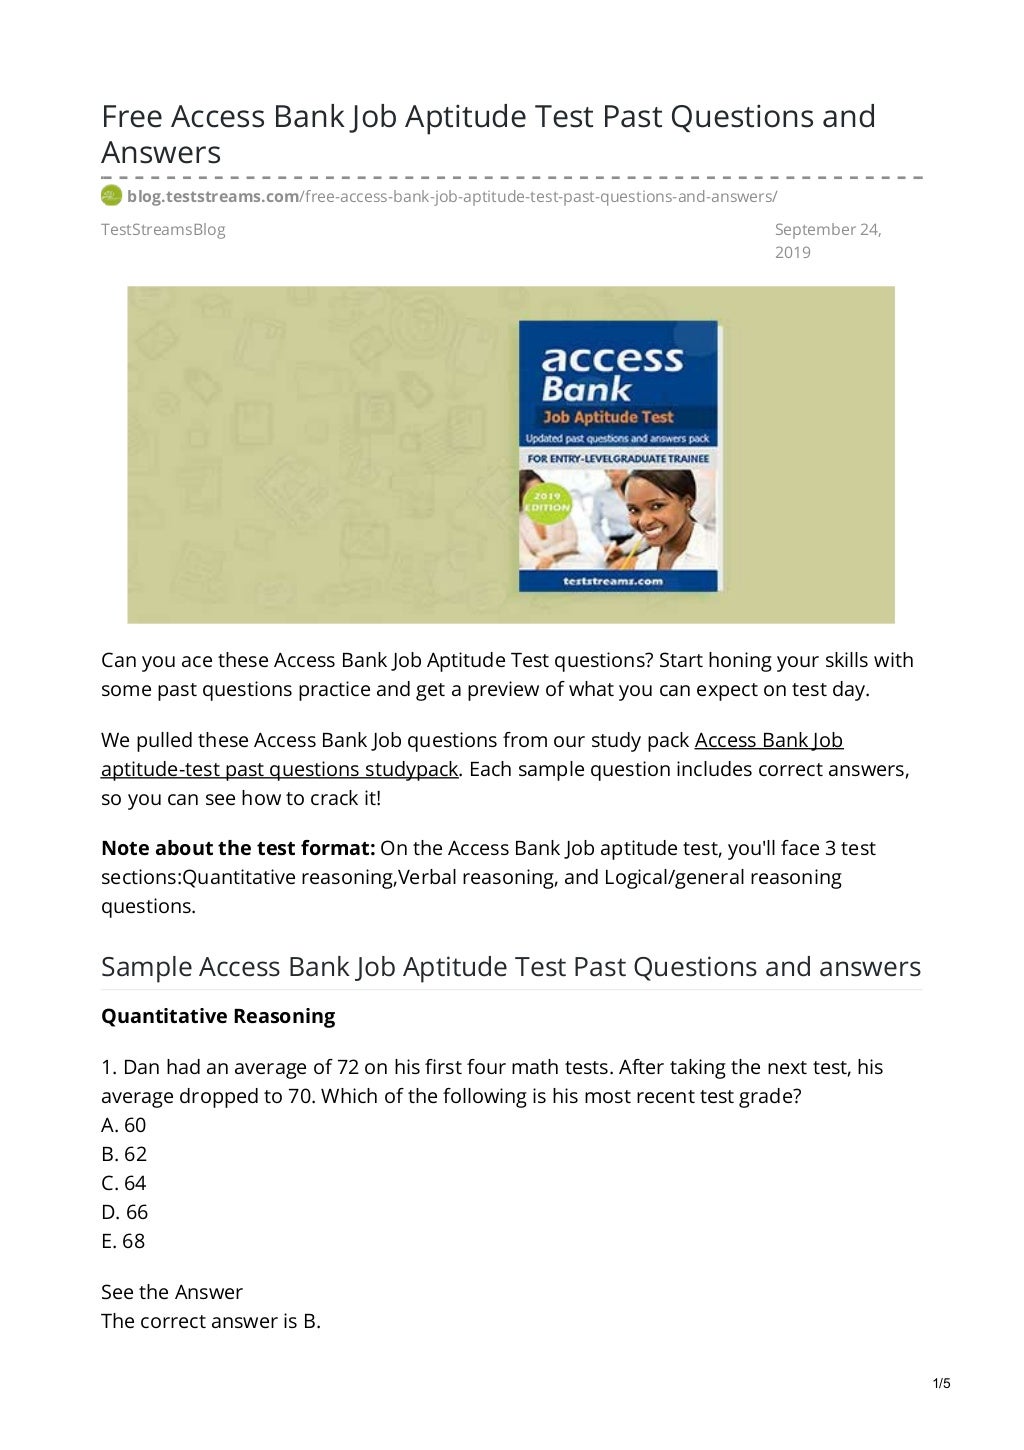 free-access-bank-job-aptitude-test-past-questions-and-answers